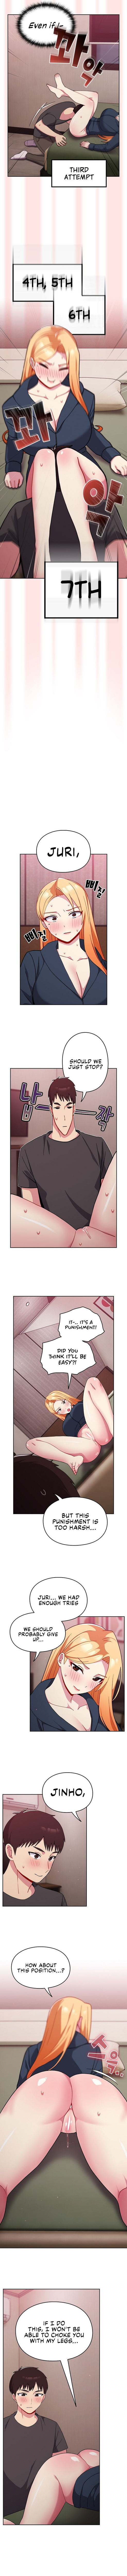 when-did-we-start-dating-chap-34-5